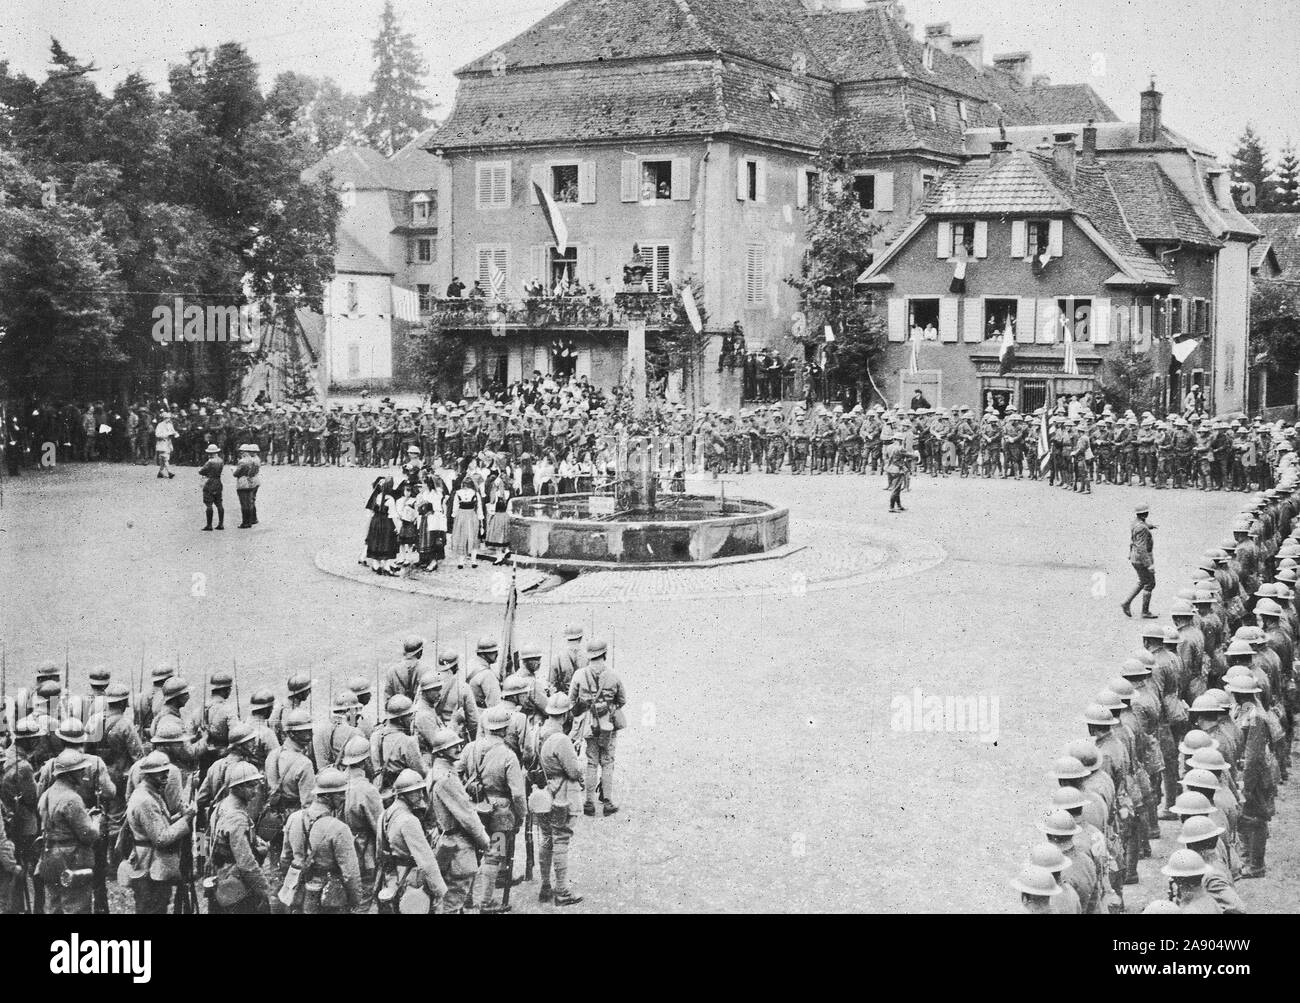 American Independence Day in Alsace. A scene on Independence Day in the Place de Yasseraux. American and French troo[s surround the square at which a patriotic service was held Stock Photo